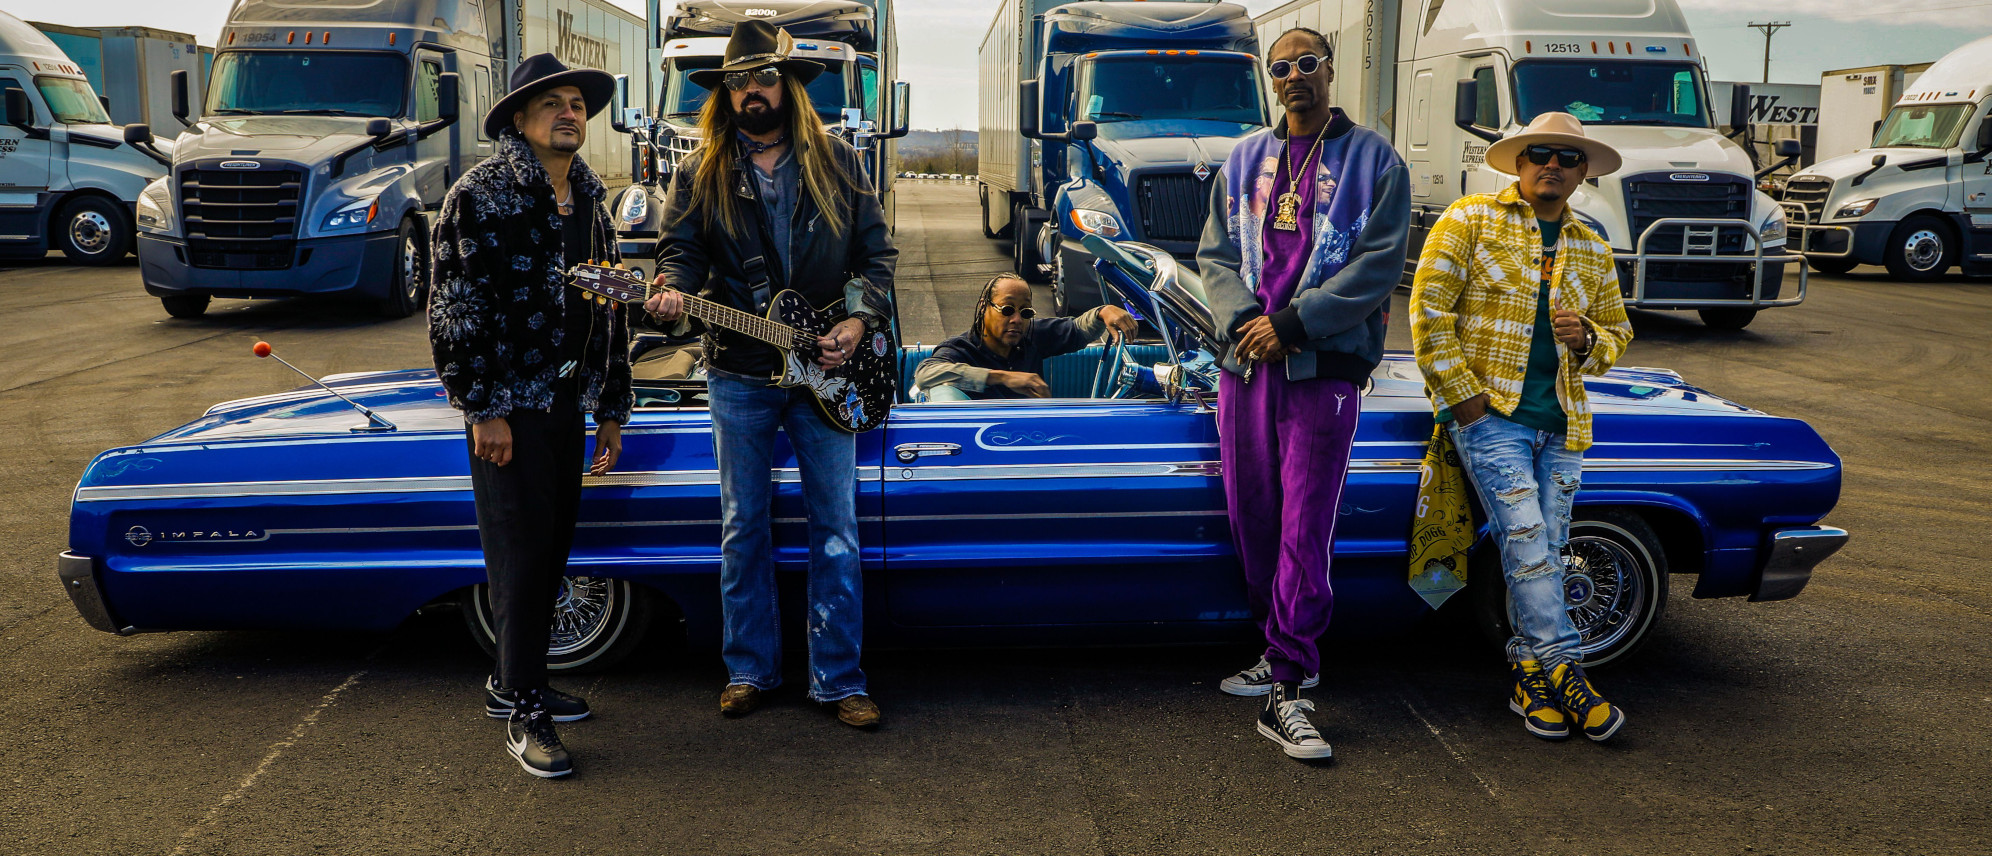 Snoop Dogg and Billy Ray Cyrus to Join The Avila Brothers on New Song